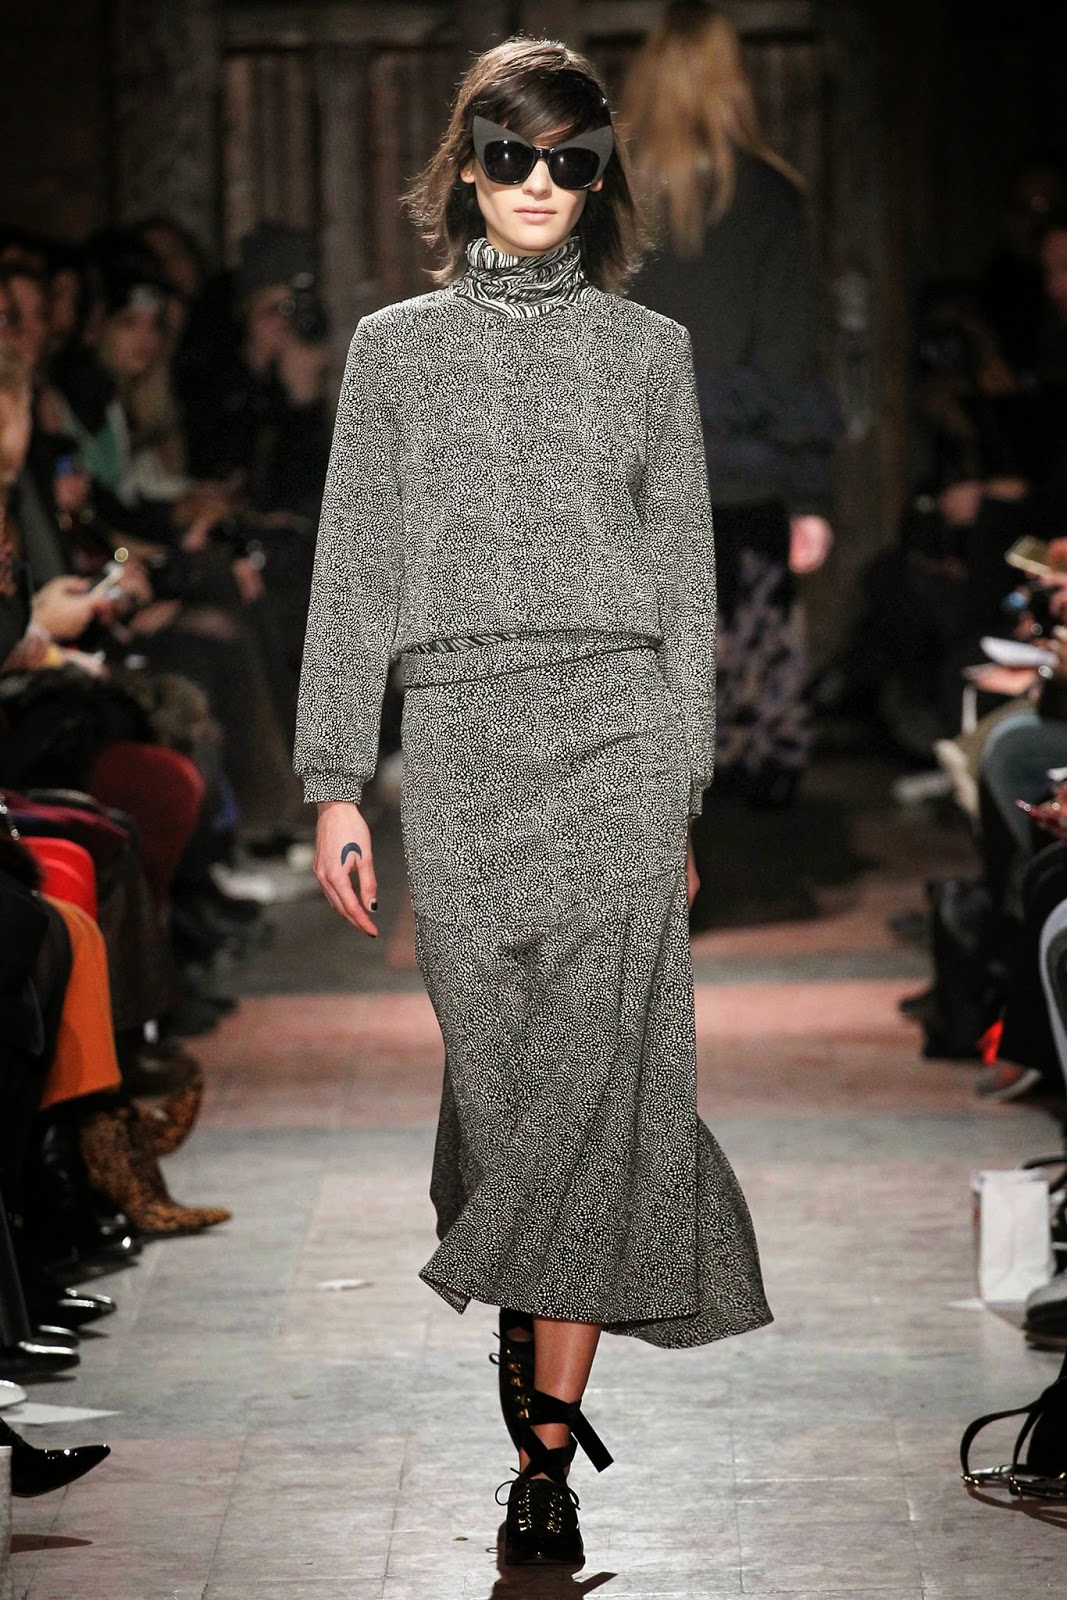 Serendipitylands: RODEBJER - FASHION SHOWS NEW YORK FALL 2015